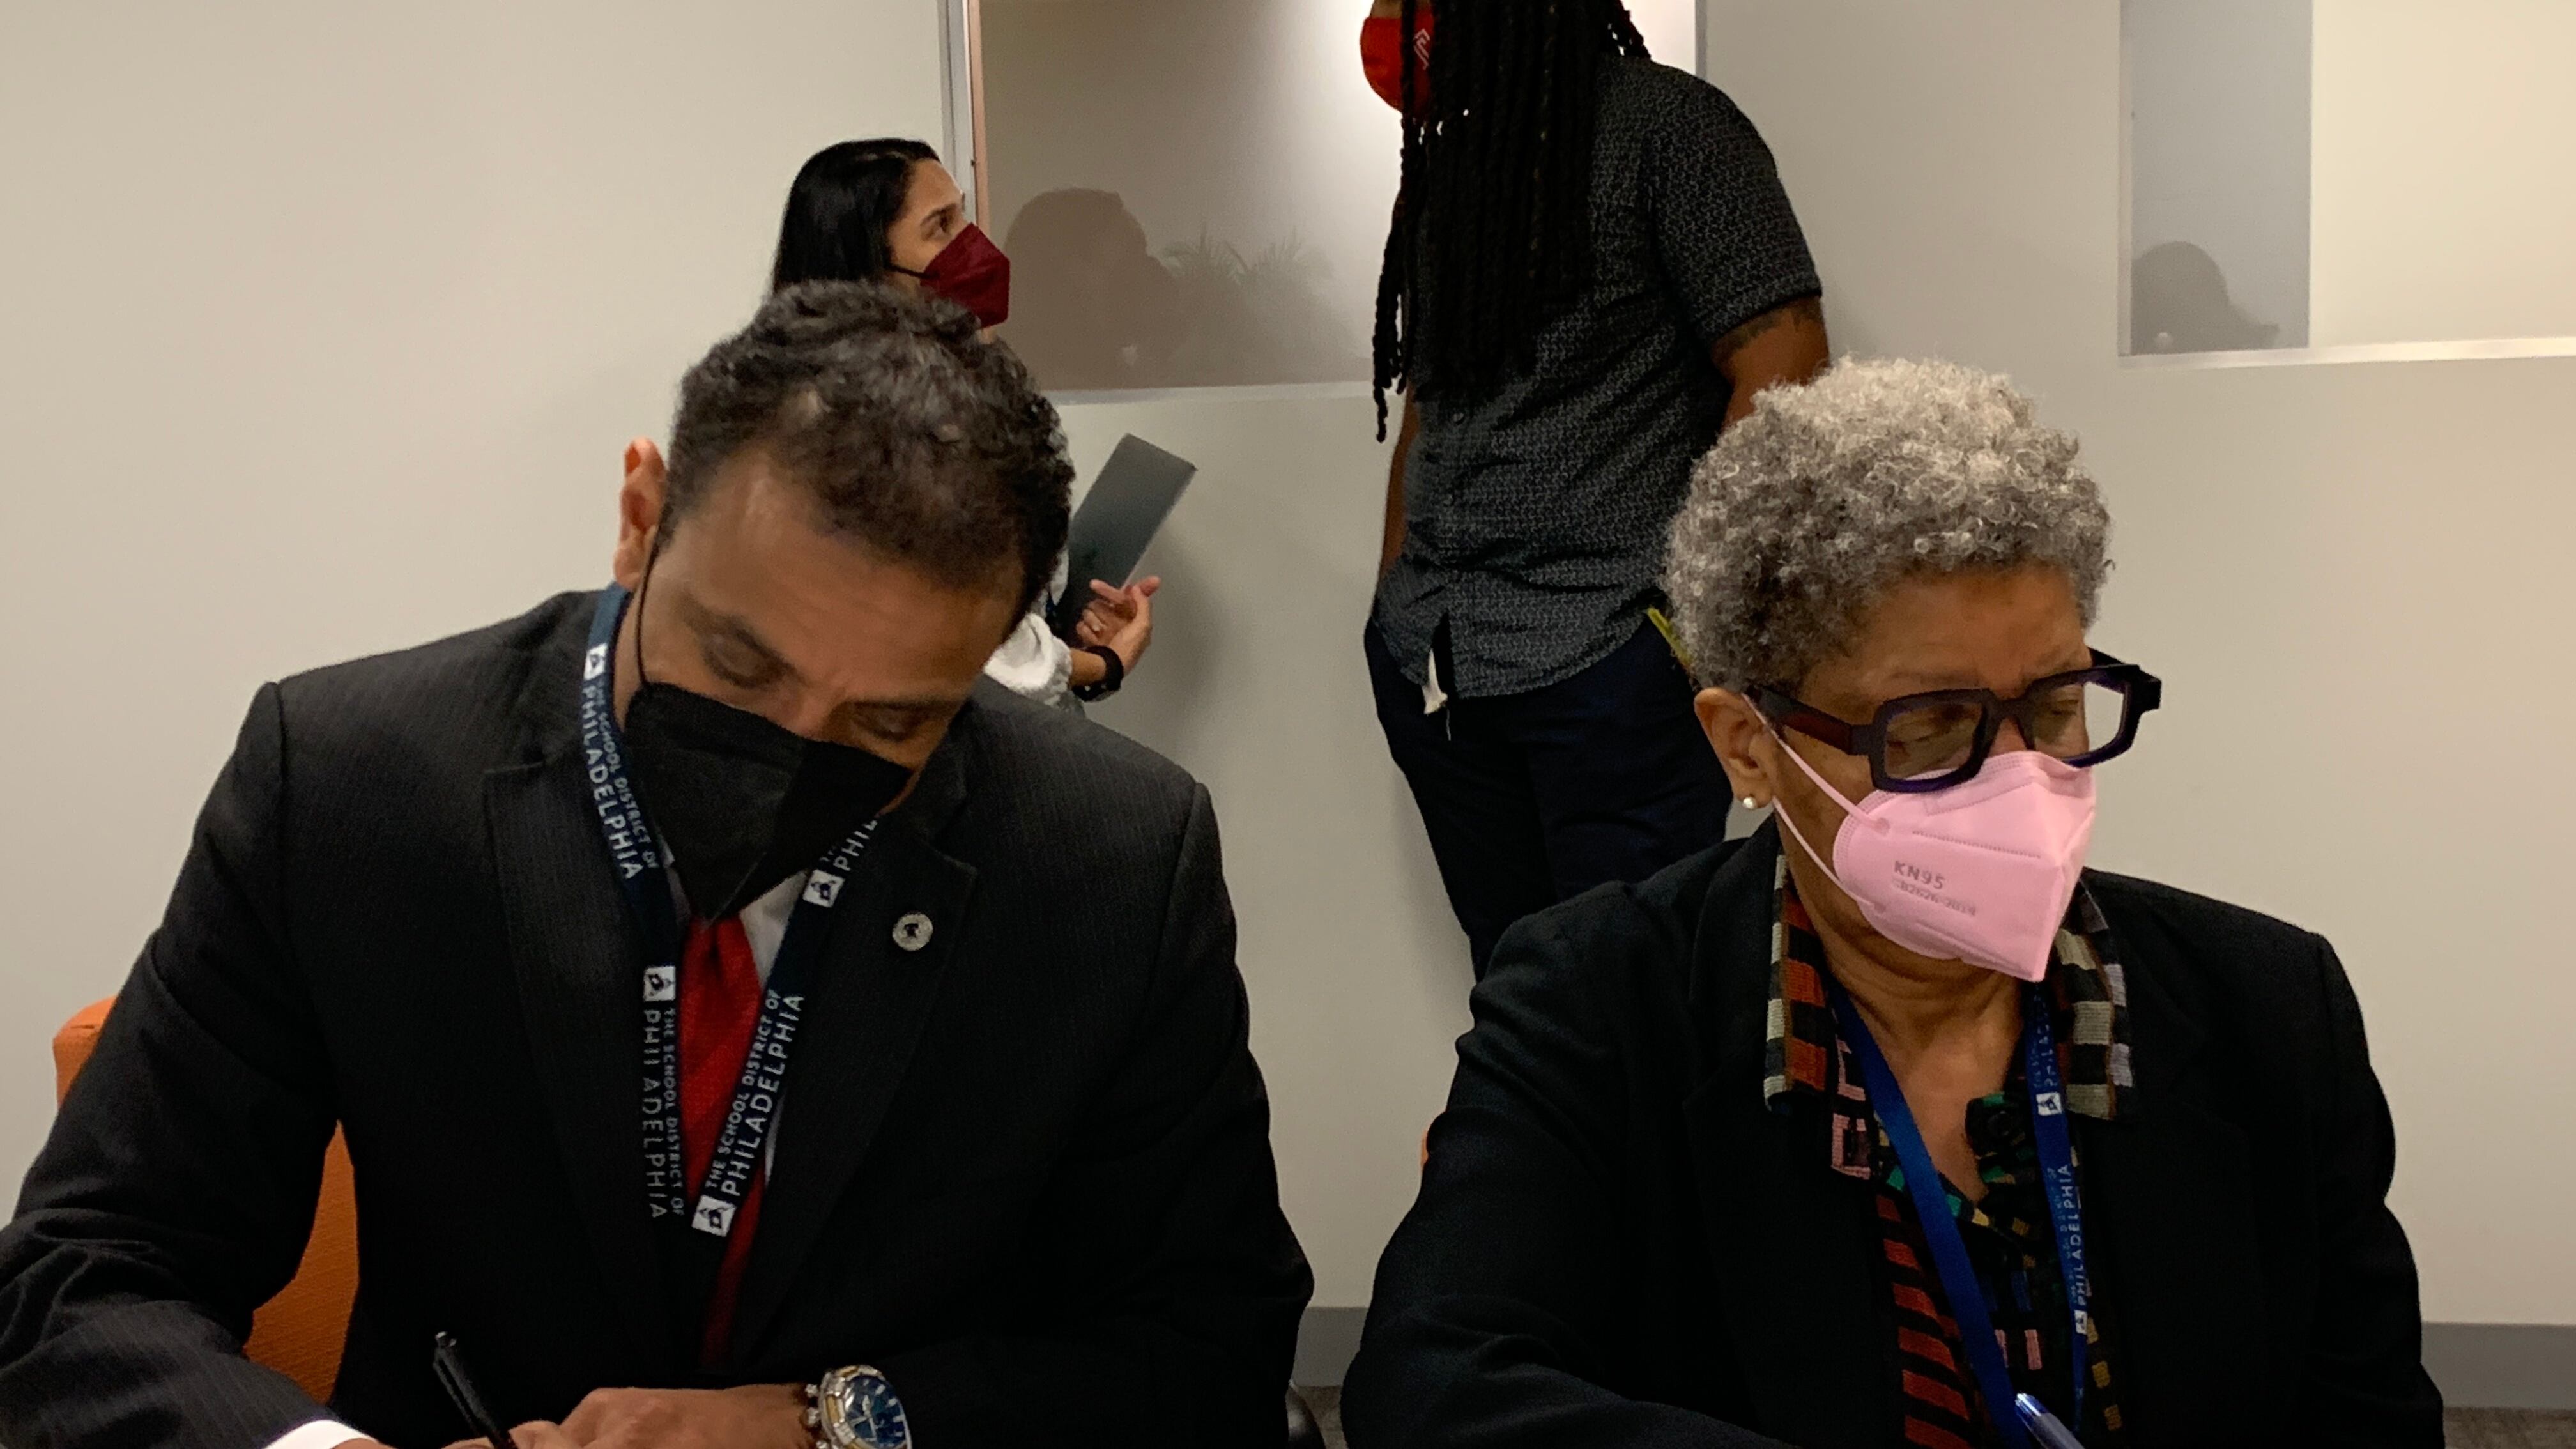 A man and a woman wearing dark tops sit next to each other while wearing masks and sign documents at a table.